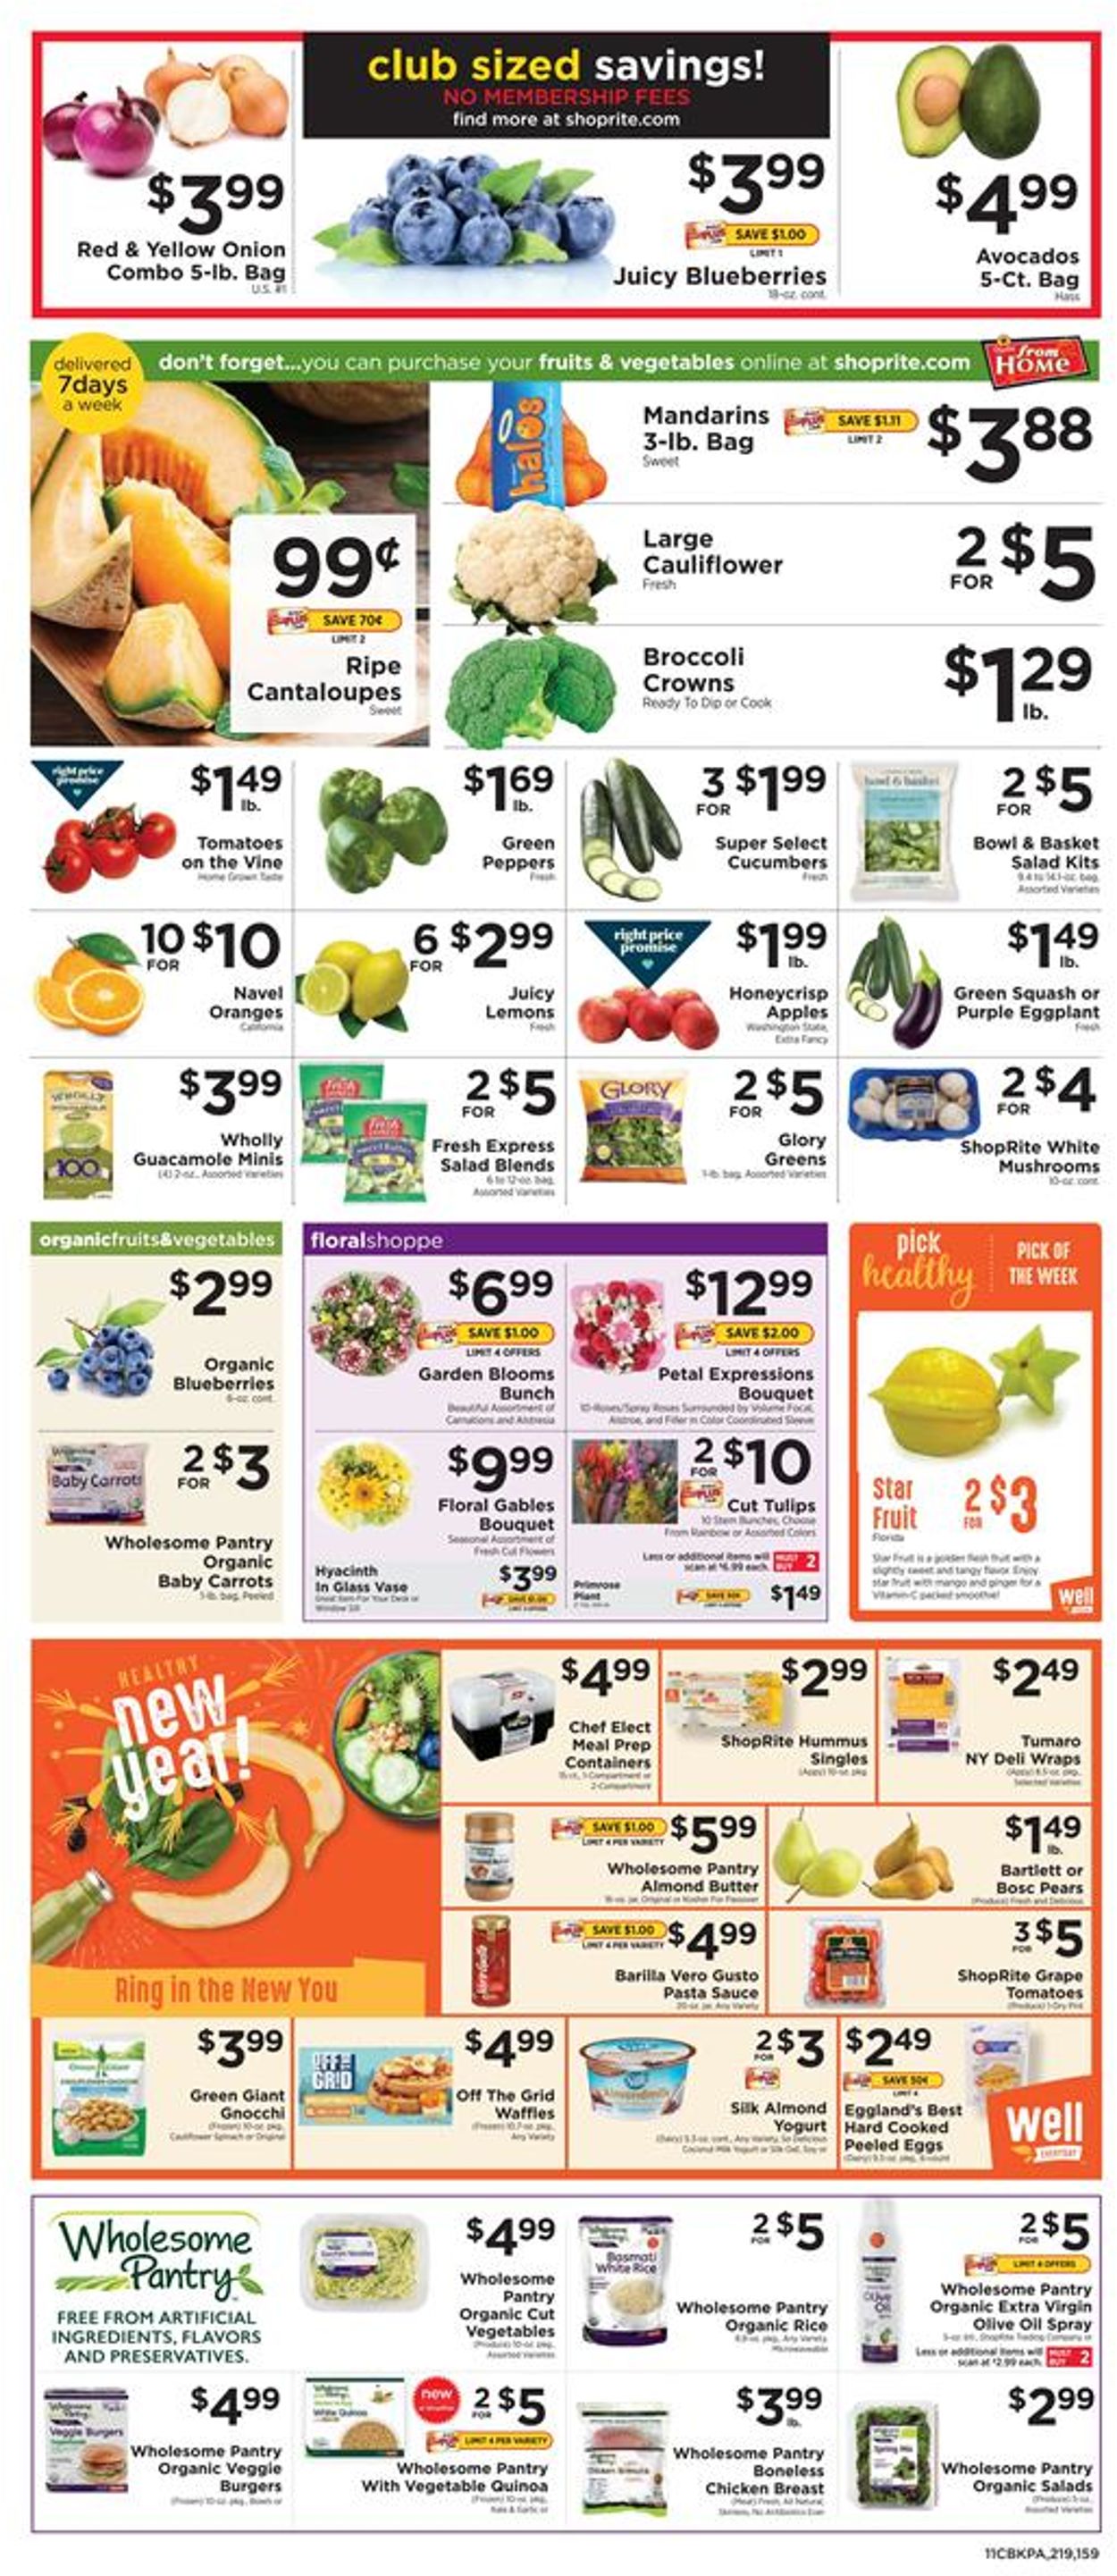 ShopRite Current weekly ad 01/05 - 01/11/2020 [11] - frequent-ads.com